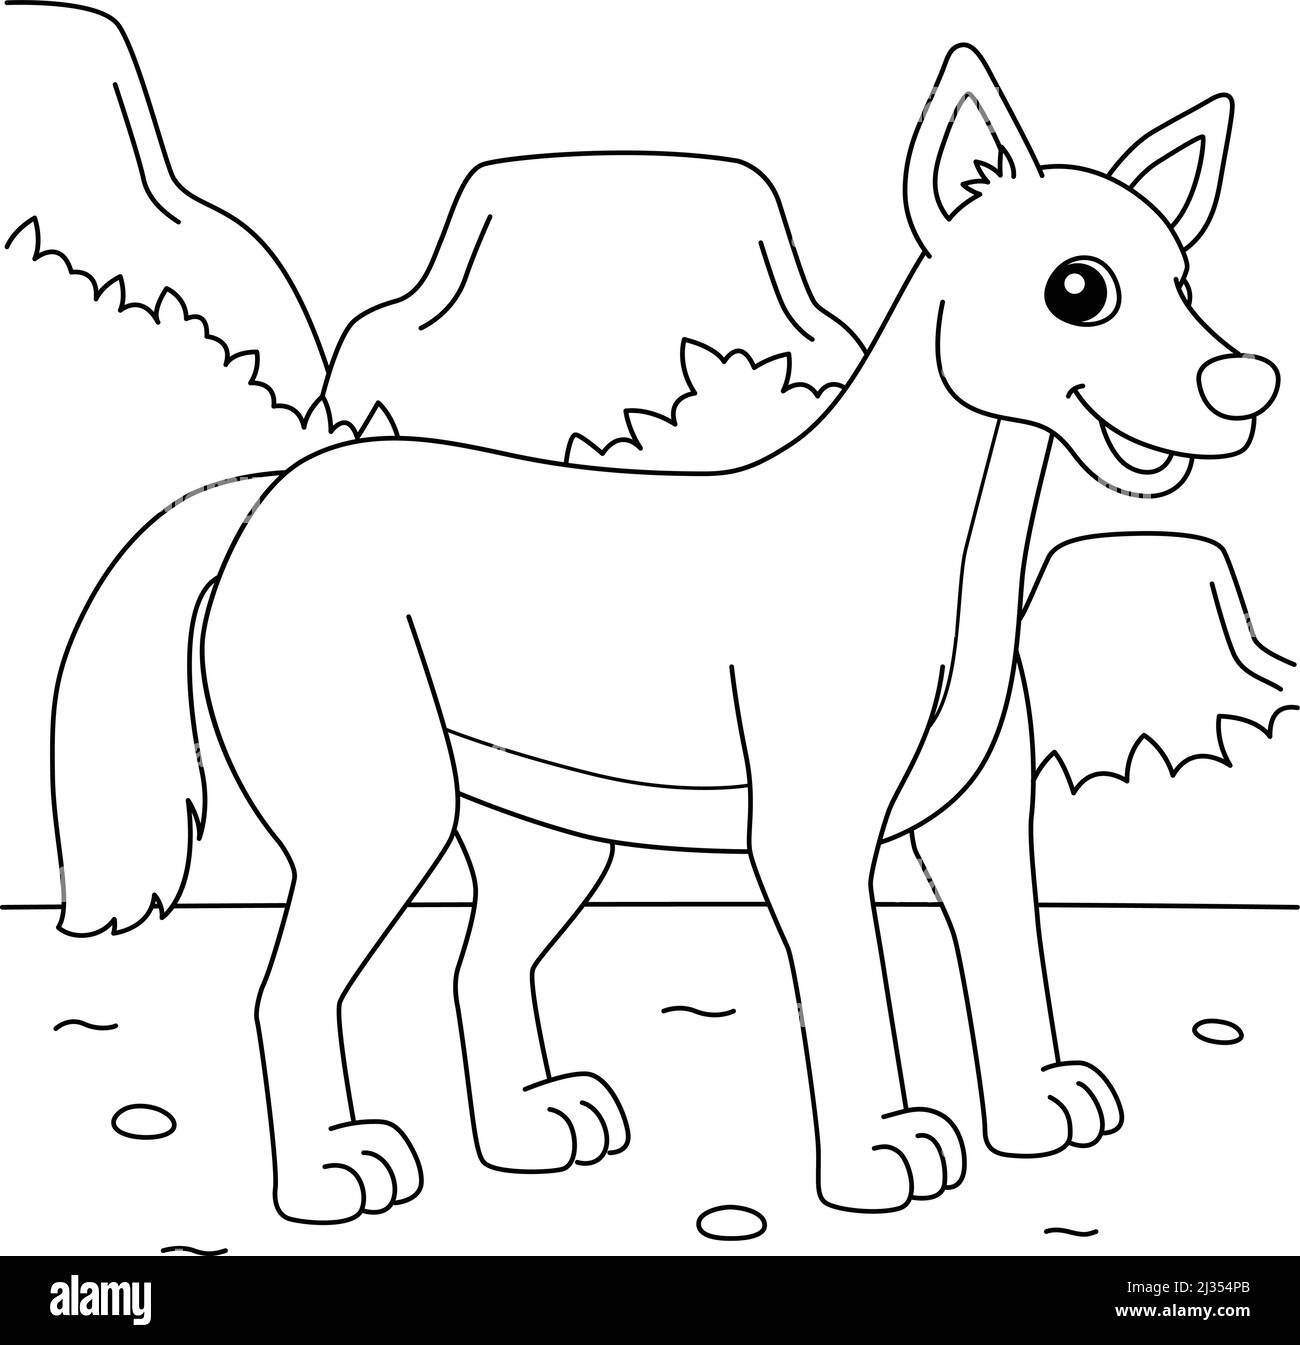 Dingo Animal Coloring Page for Kids Stock Vector Image & Art - Alamy